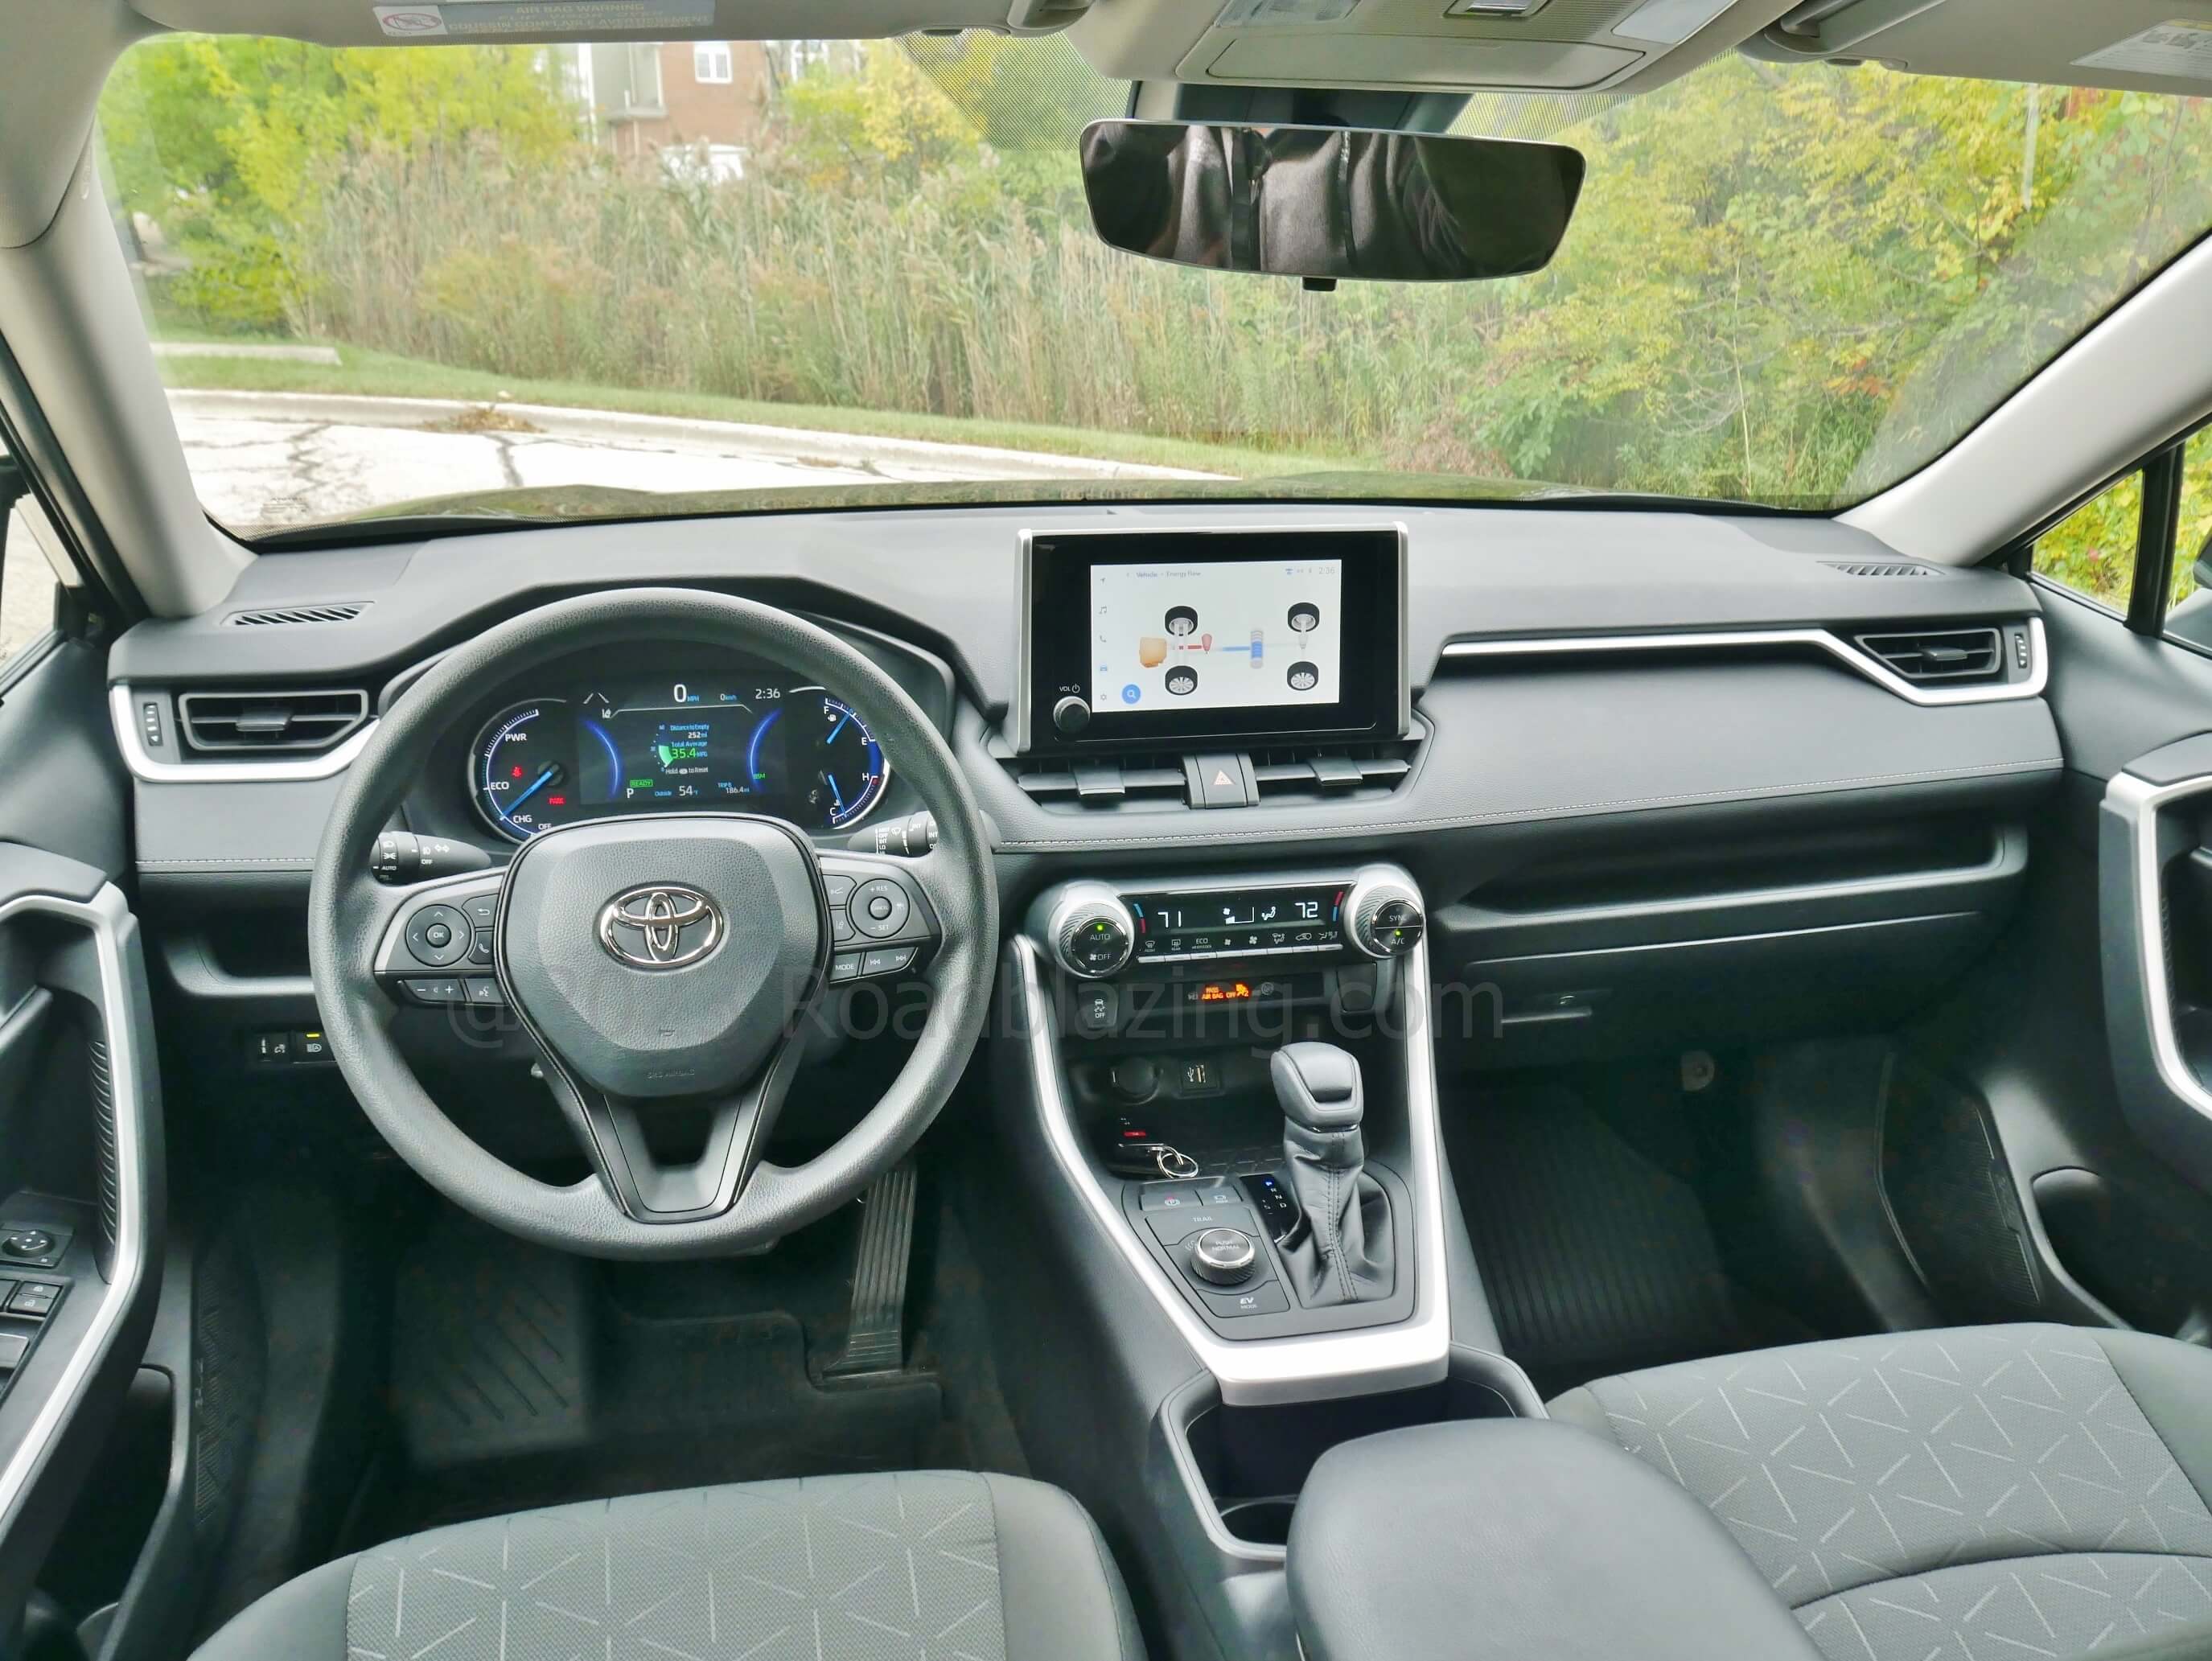 2023 Toyota RAV4 Hybrid AWD Woodland Edition: layered dashboard w/ color displays + knurled oversized climate knobs